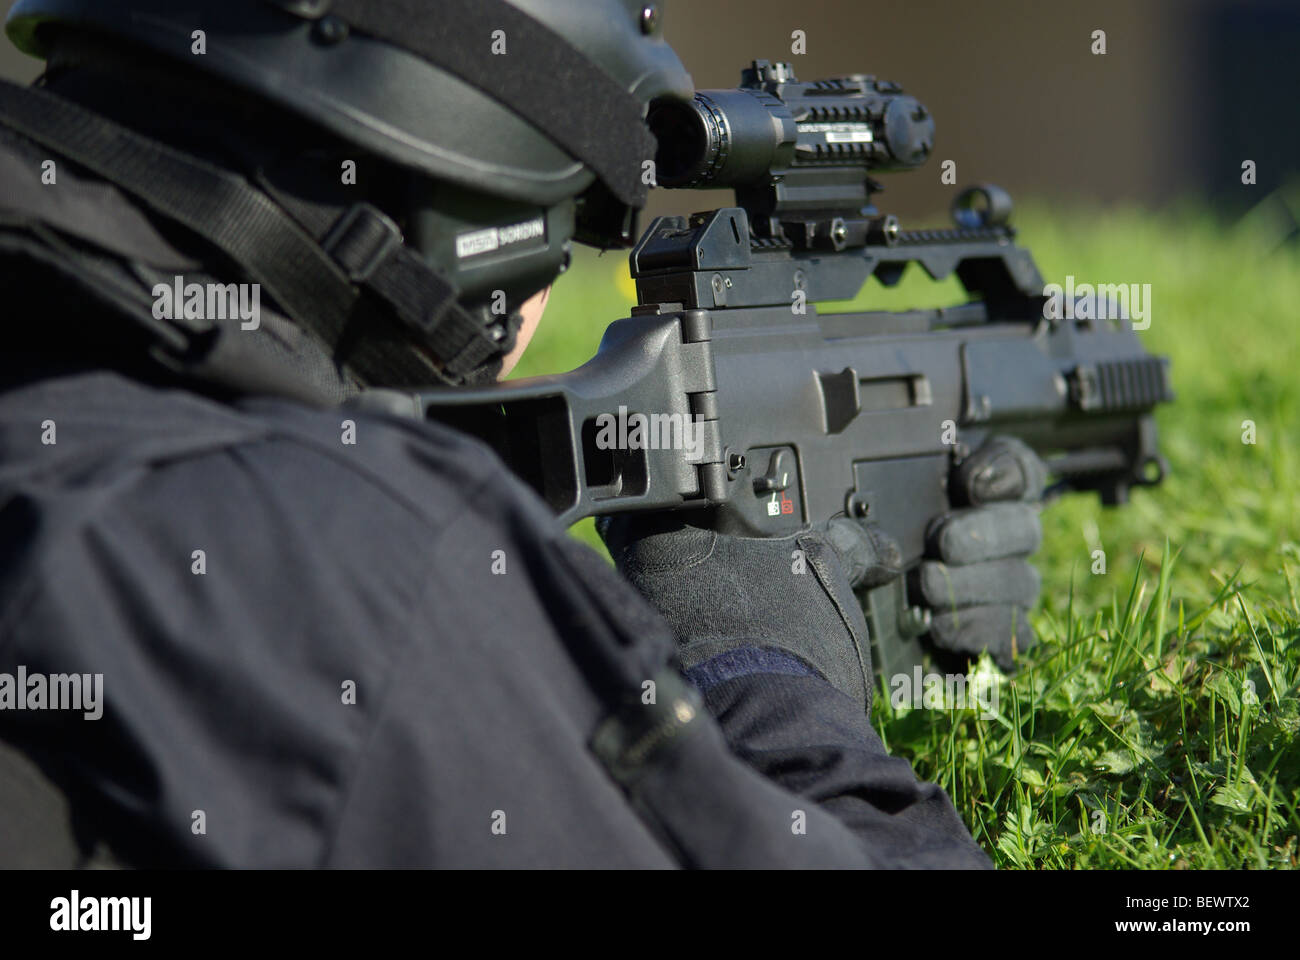 Police firearms officer in containment position Stock Photo